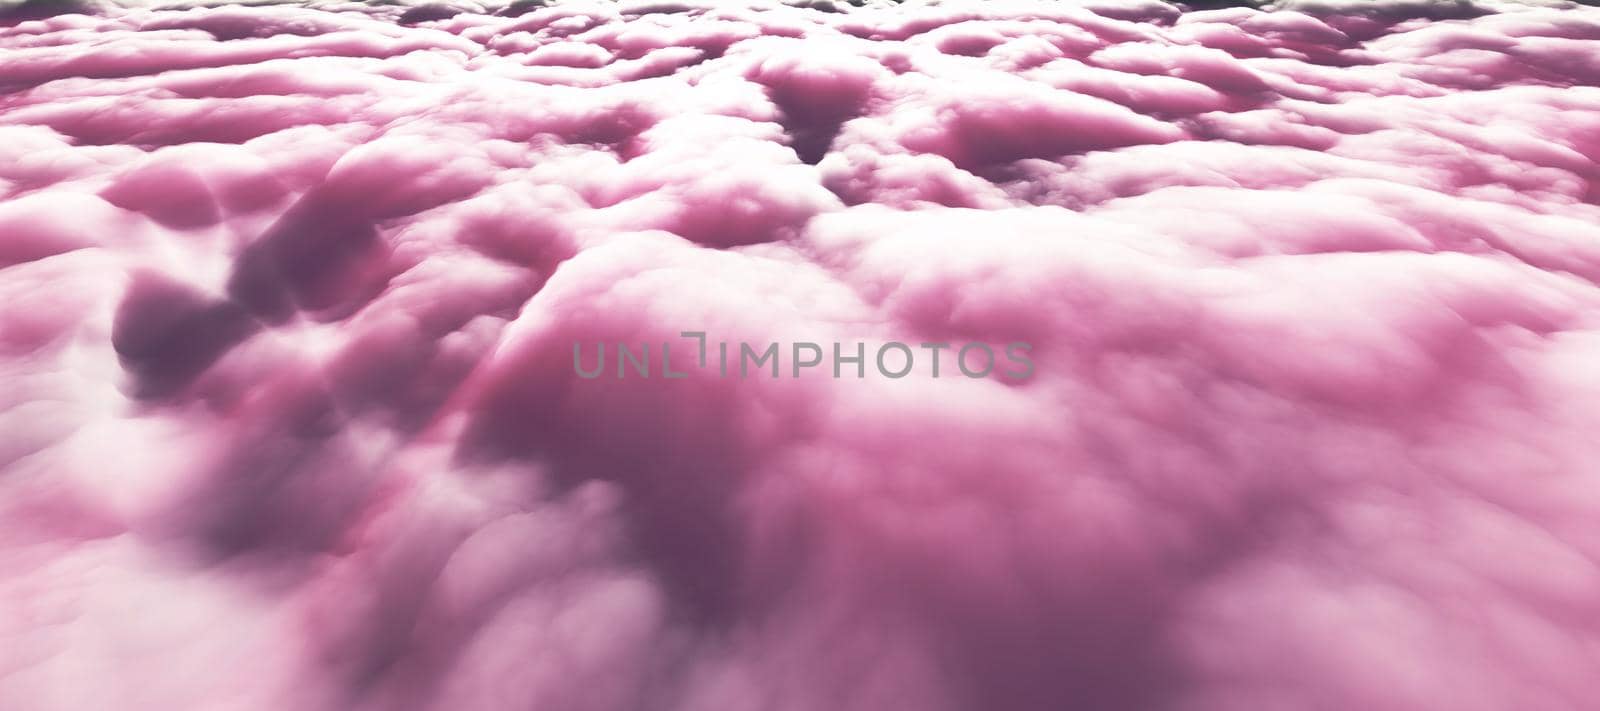 above clouds sun ray 3d render illustration